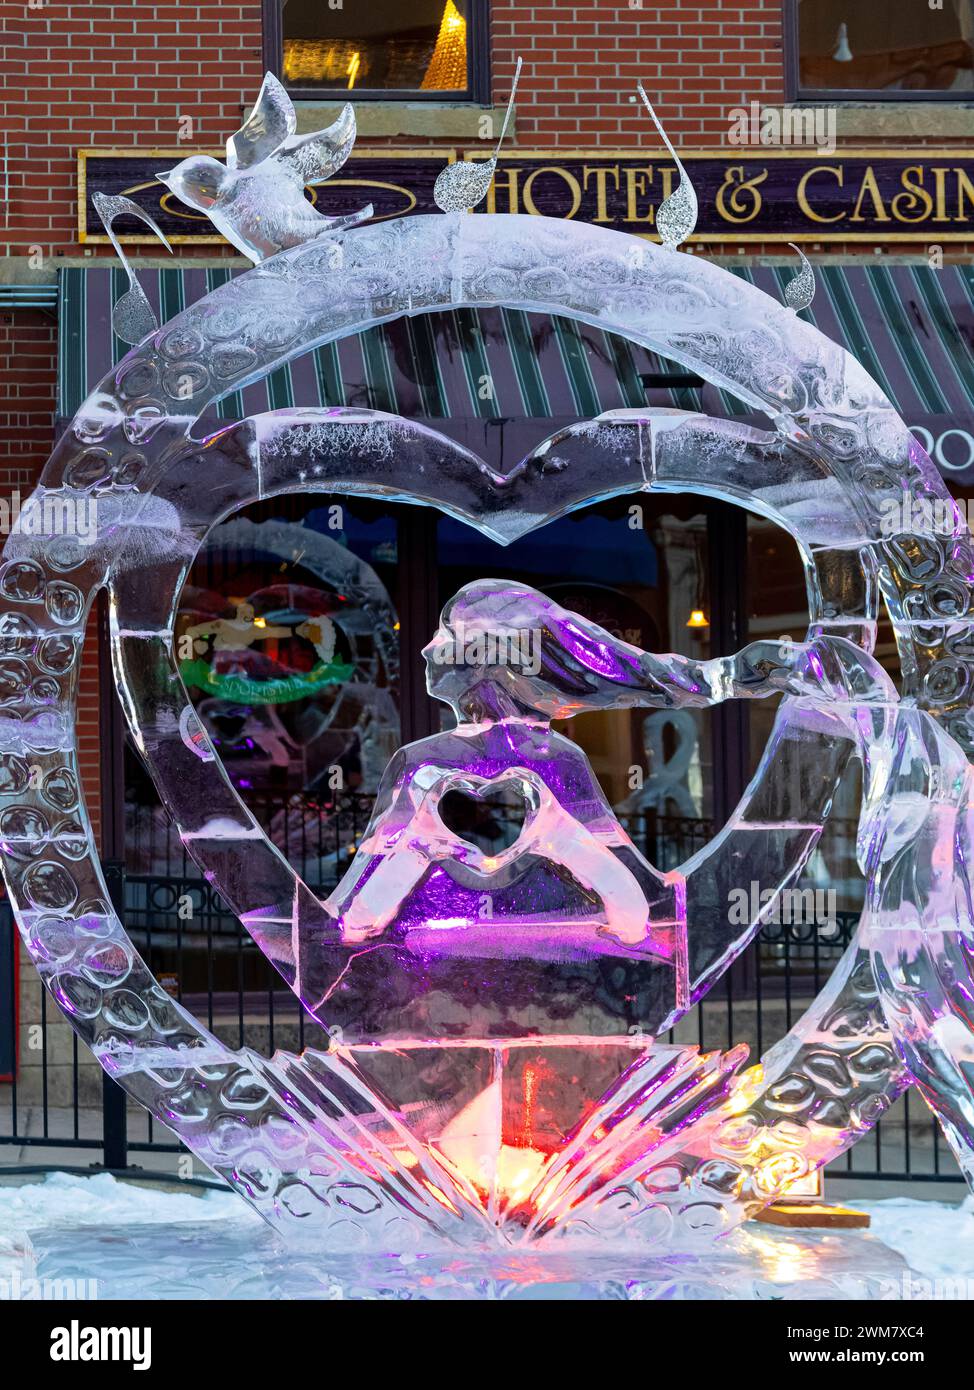 Ice sculptures at the Cripple Creek Ice Festival Stock Photo